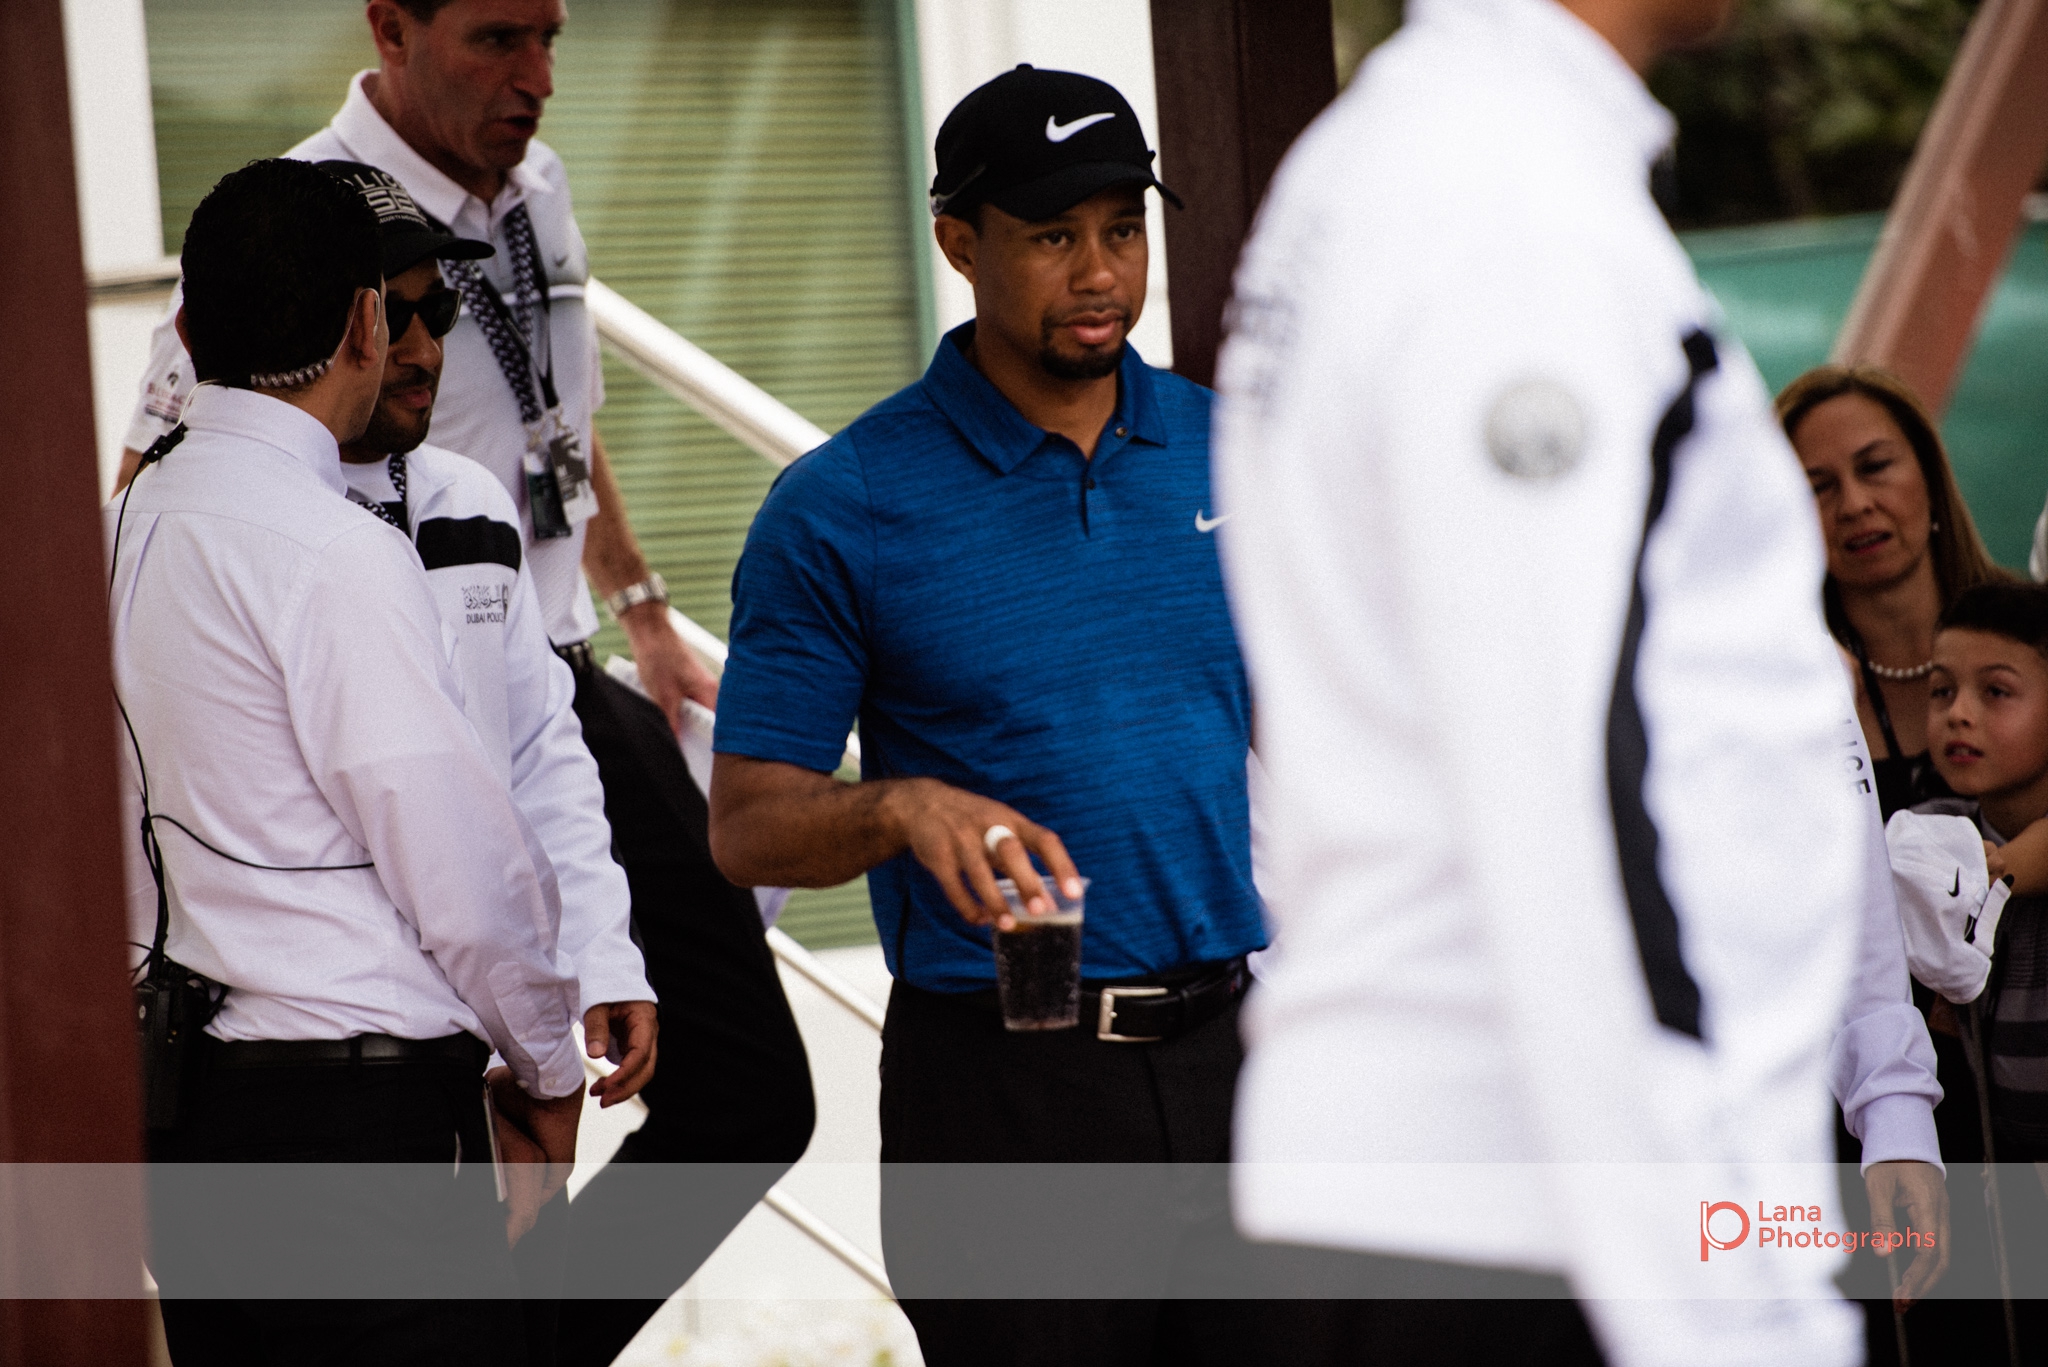  Tiger Woods leaves the organizers office and walks to his car during day 1 of the Omega Dubai Desert Classic in February 2017 